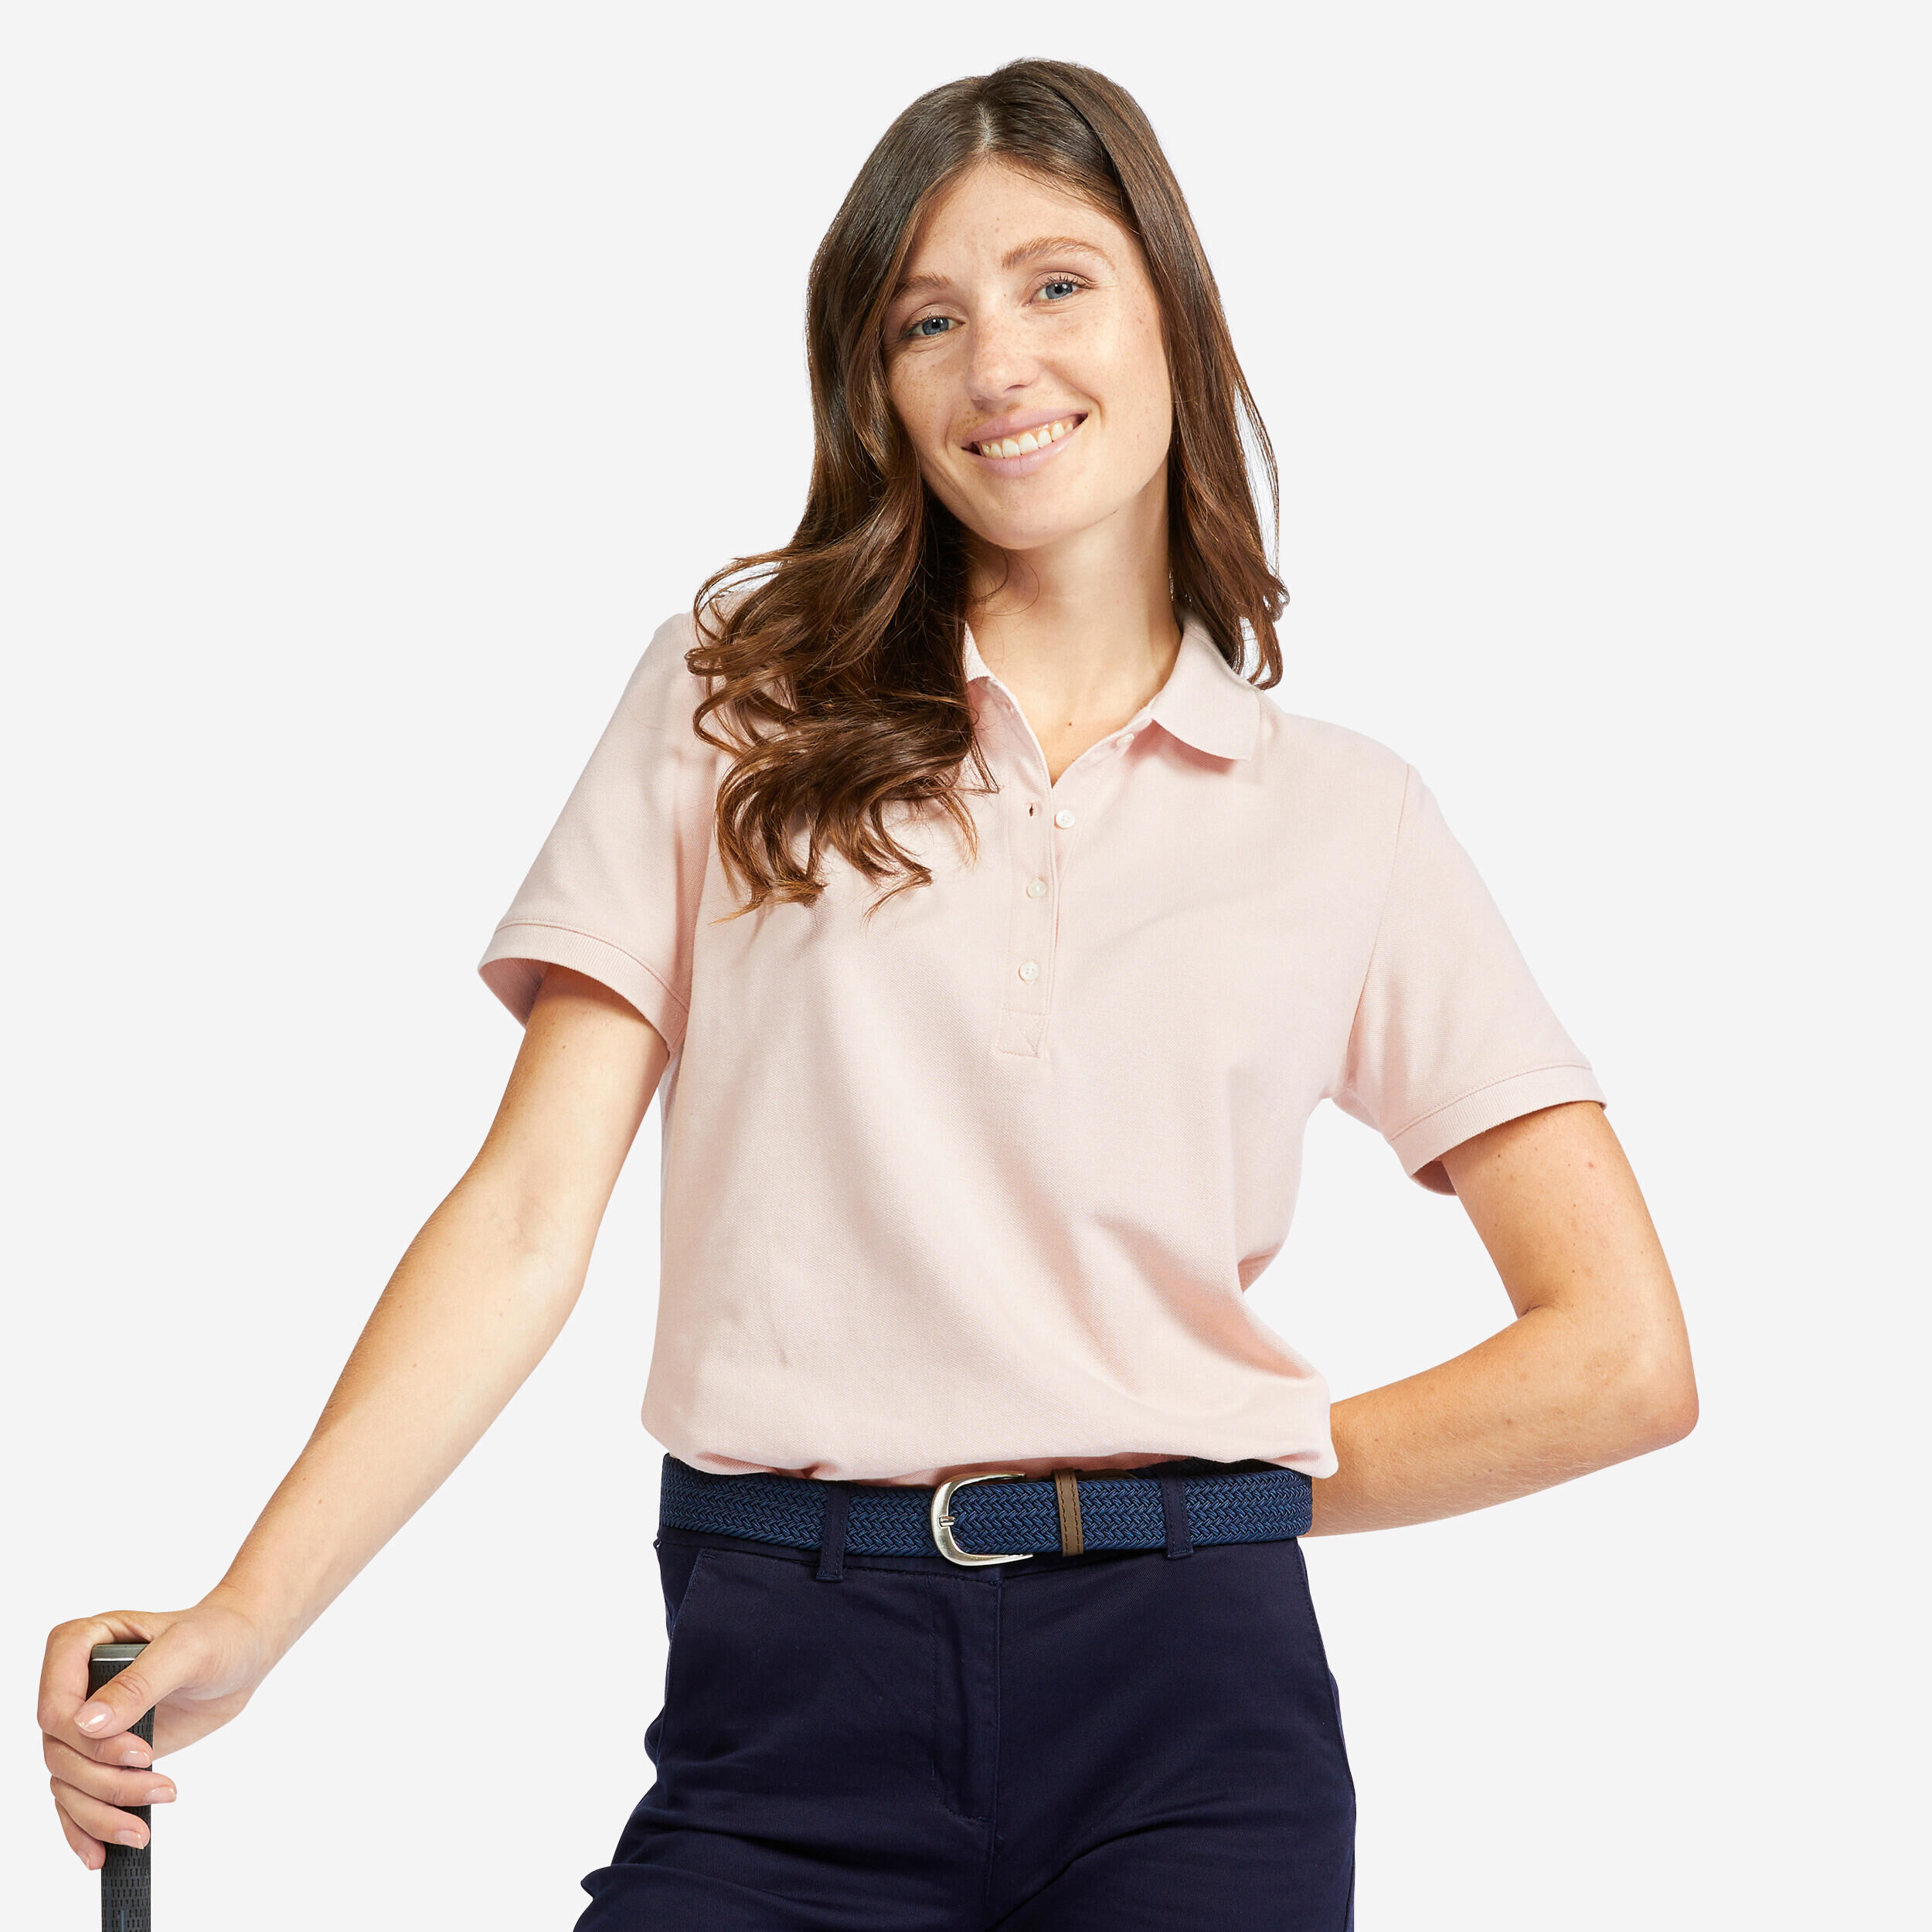 INESIS Women's golf short-sleeved polo shirt - MW500 pale pink